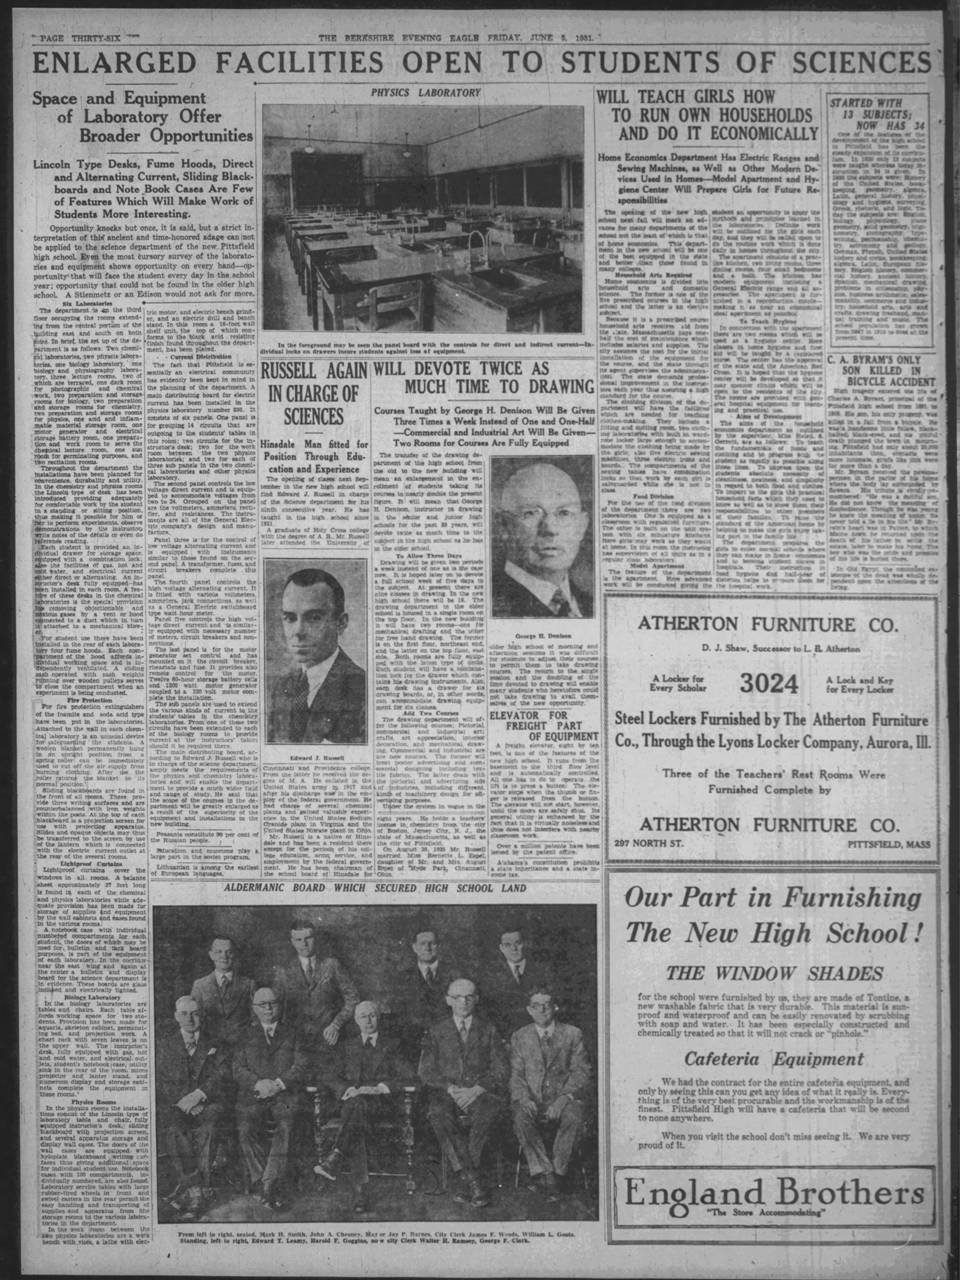 The_Berkshire_Eagle_1931_06_05_page_36.jpg